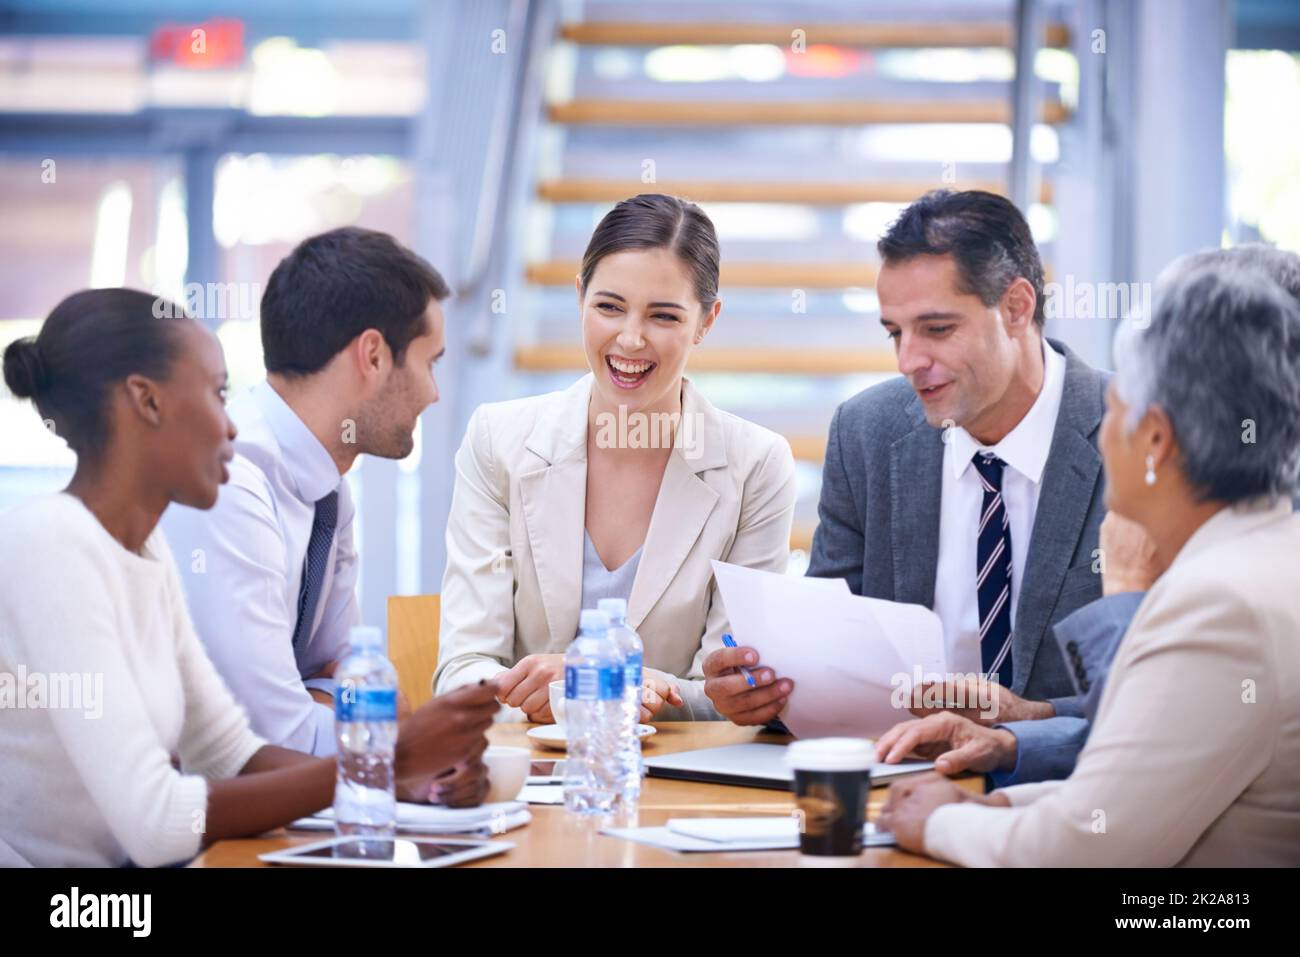 This team is passionate about their work. A group of businesspeople having a lively meeting together. Stock Photo